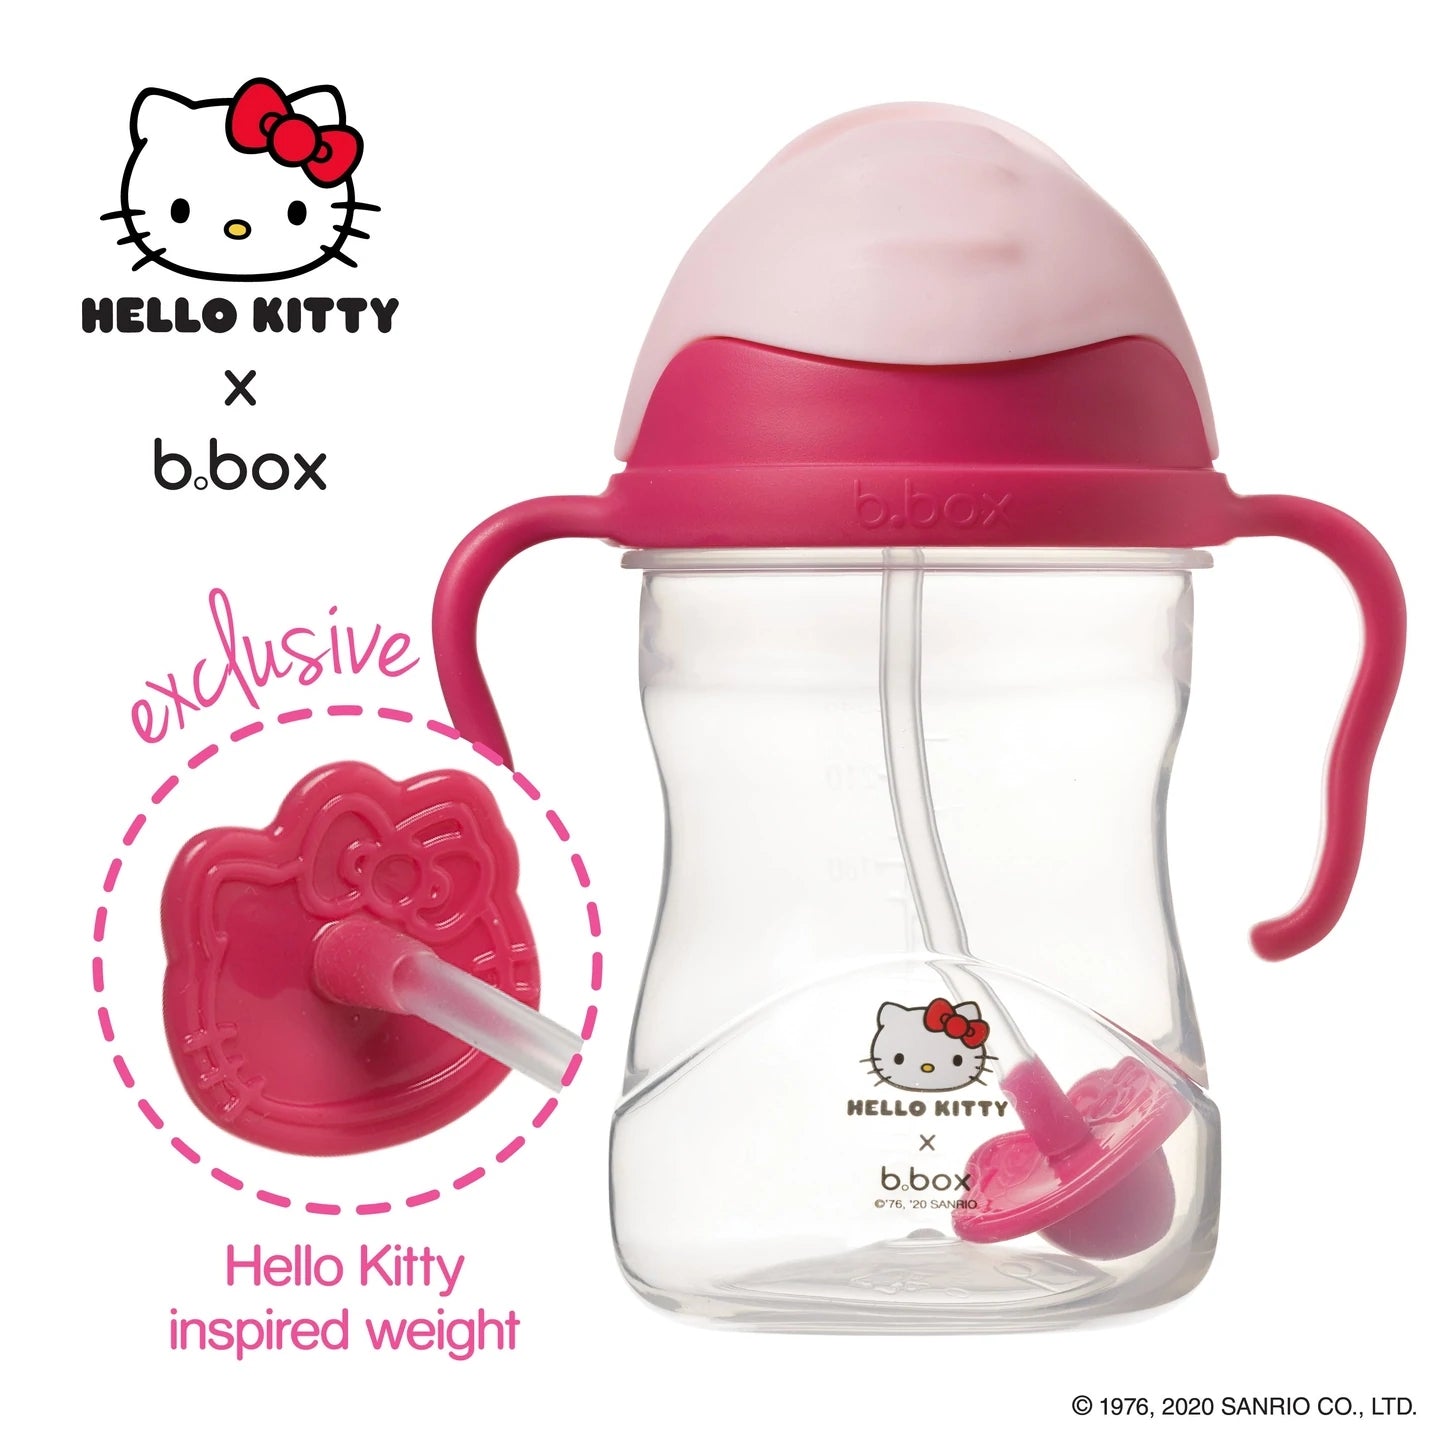 B.BOX Hello Kitty Sippy Cup Pop Star Pink / Red.